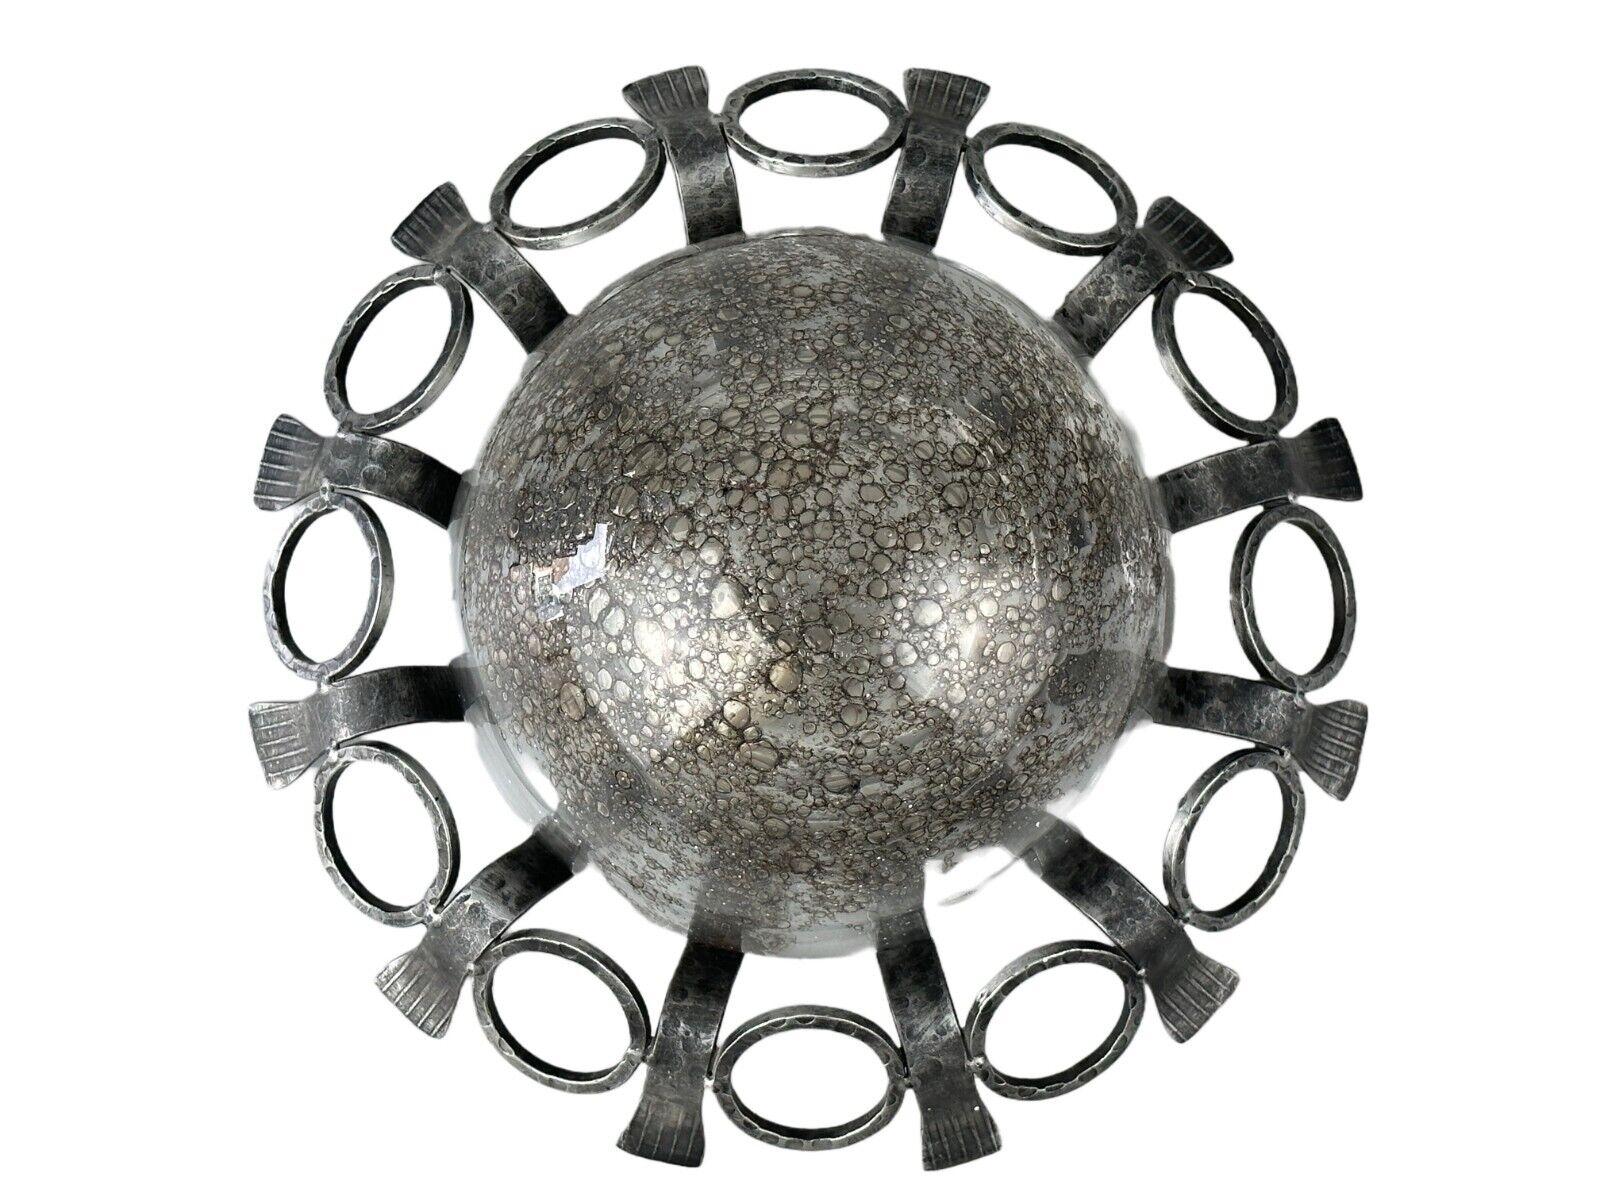 60s 70s Brutalist wall lamp or ceiling lamp made of iron & glass design

Object: wall lamp

Manufacturer:

Condition: good - vintage

Age: around 1960-1970

Dimensions:

Diameter = 40.5cm
Height = 17.5cm

Other notes:

E27 socket

The pictures serve